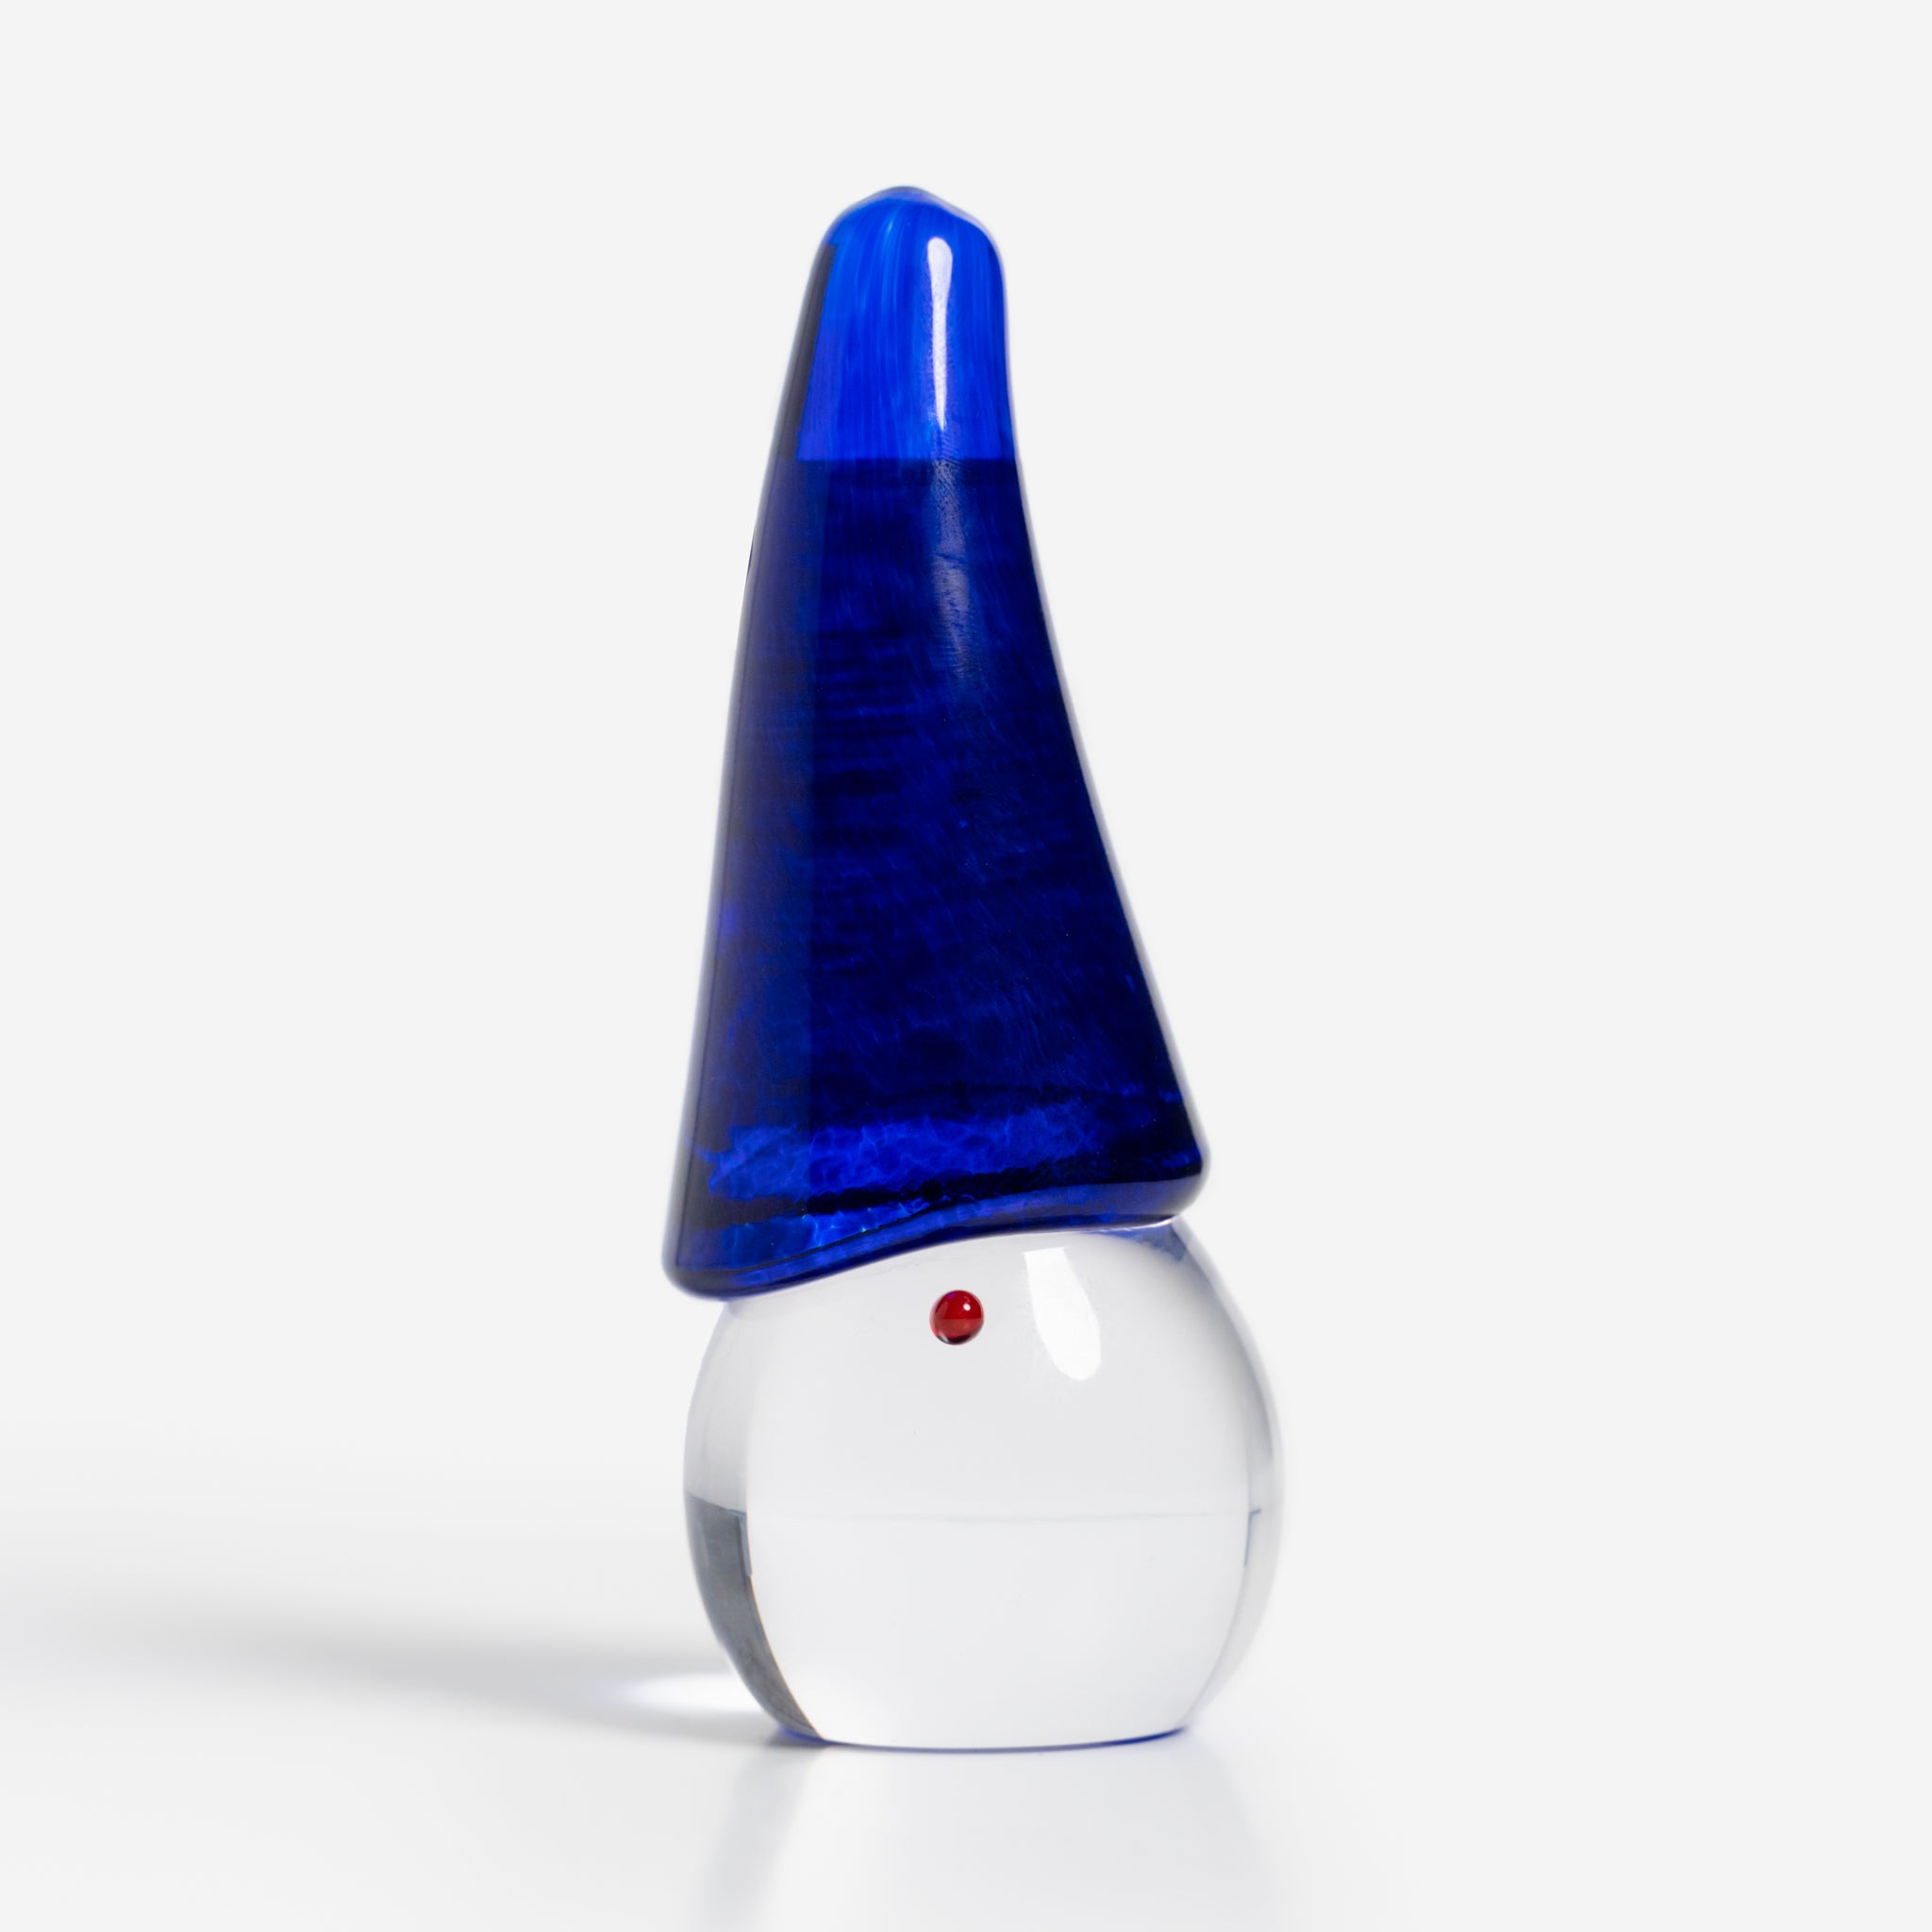 The Tomte by AO Glass